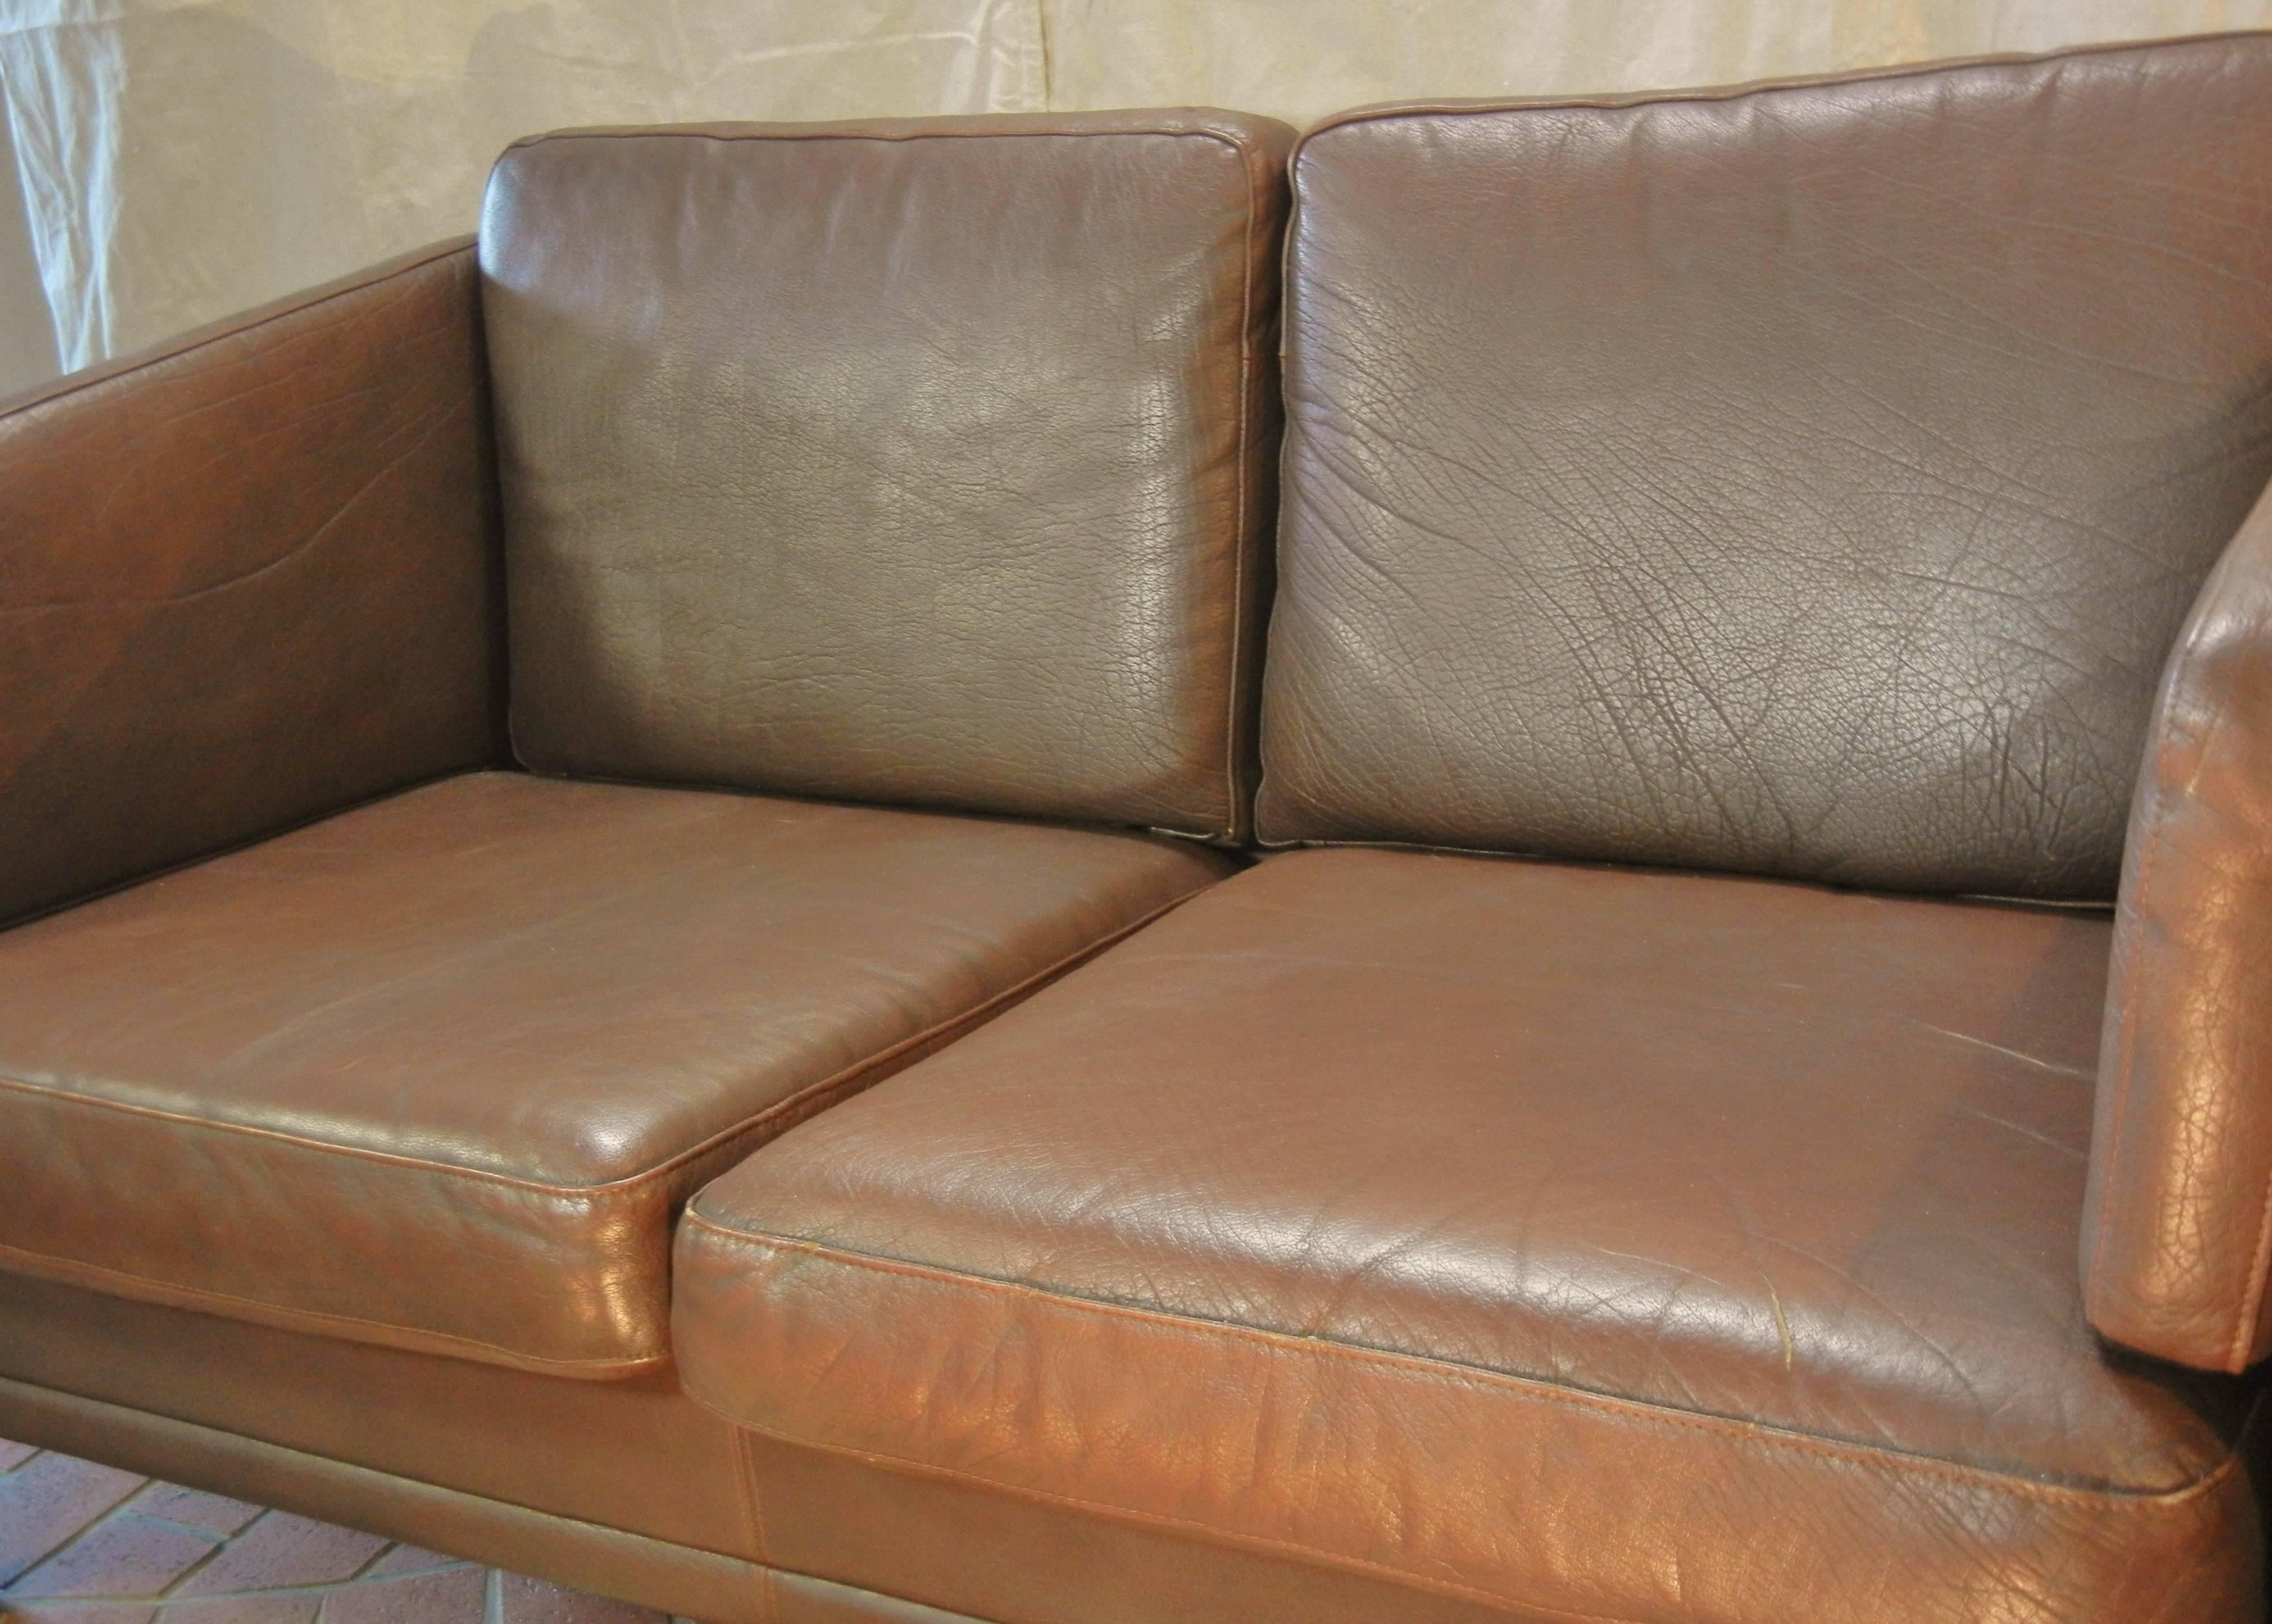 20th Century Two-Seat Leather Sofa in Danish Modern Børge Mogensen Style, 1970s